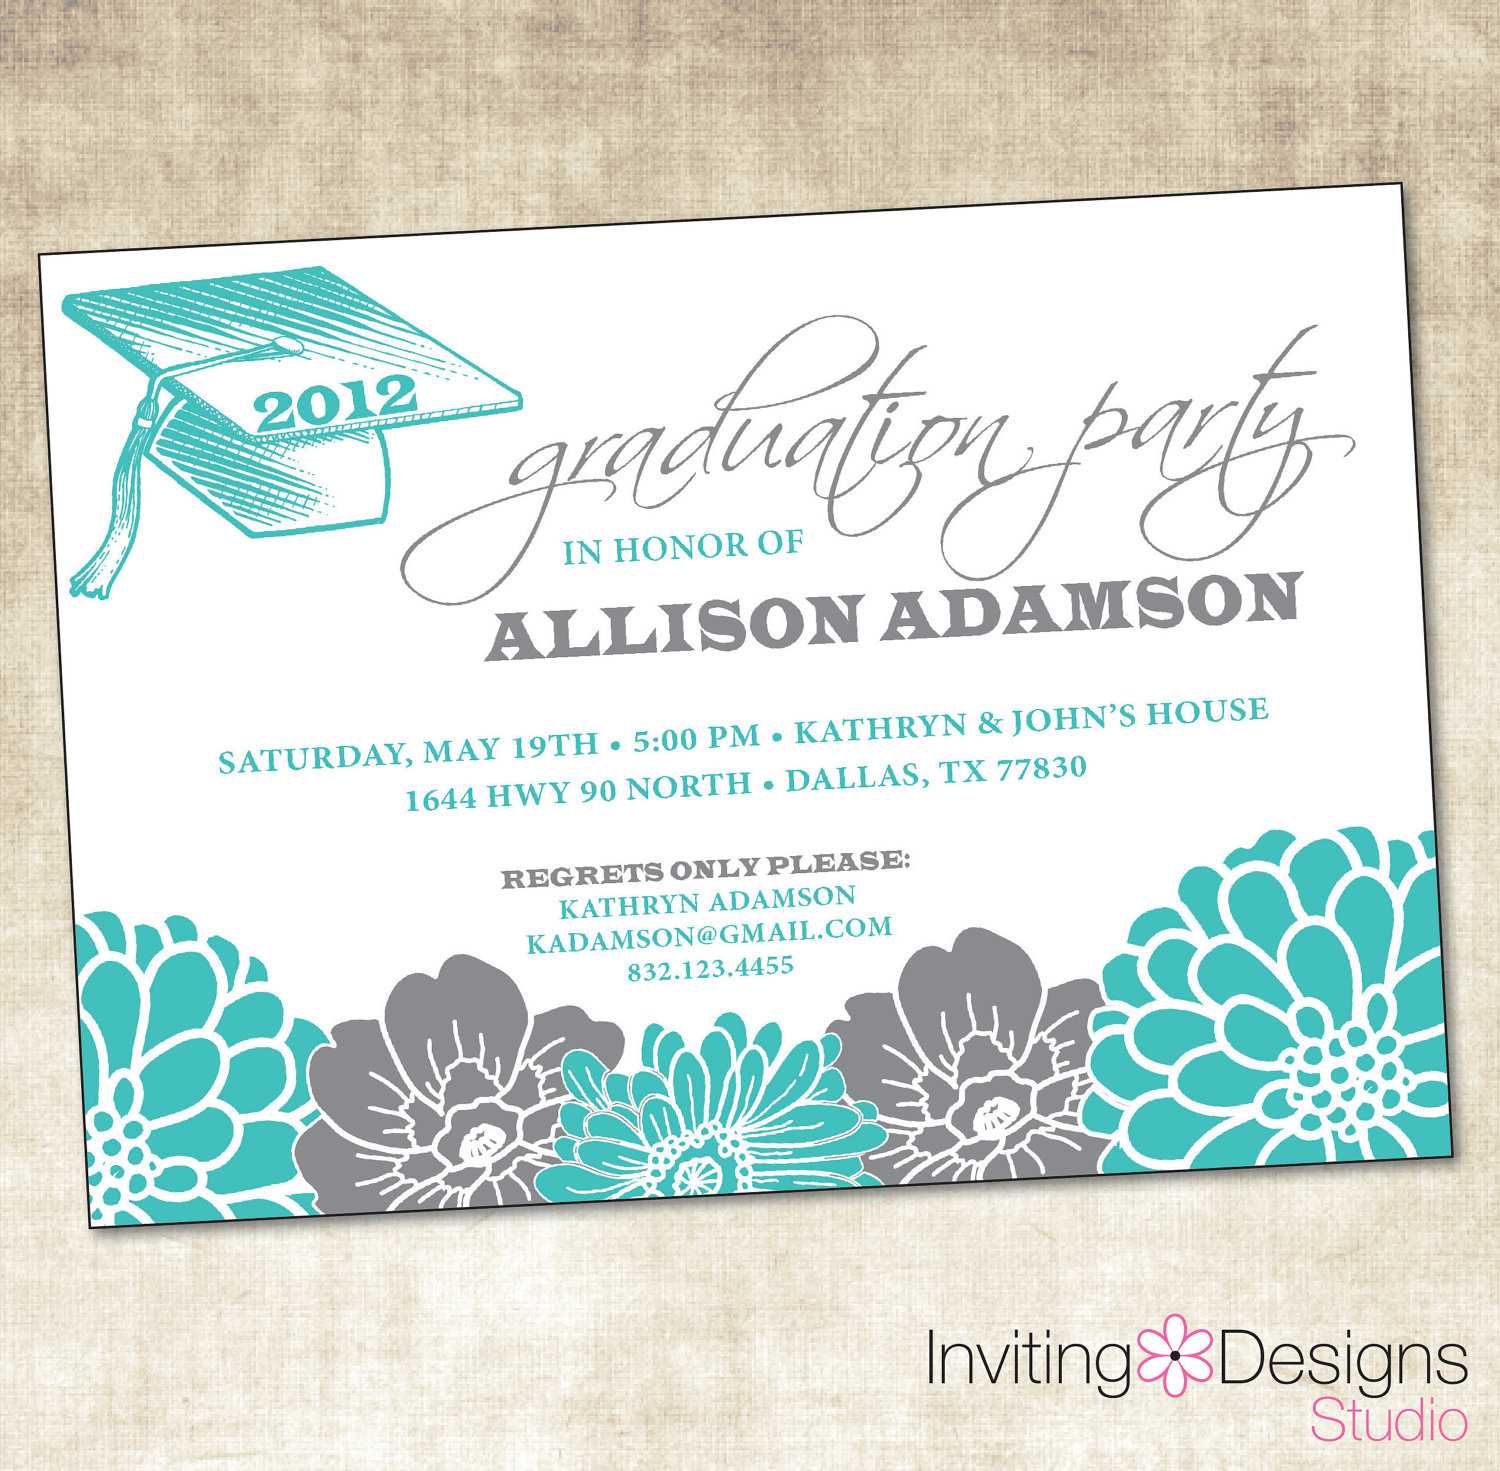 Cheap Graduation Party Invitations – Party Invitation Collection With Regard To Graduation Party Invitation Templates Free Word